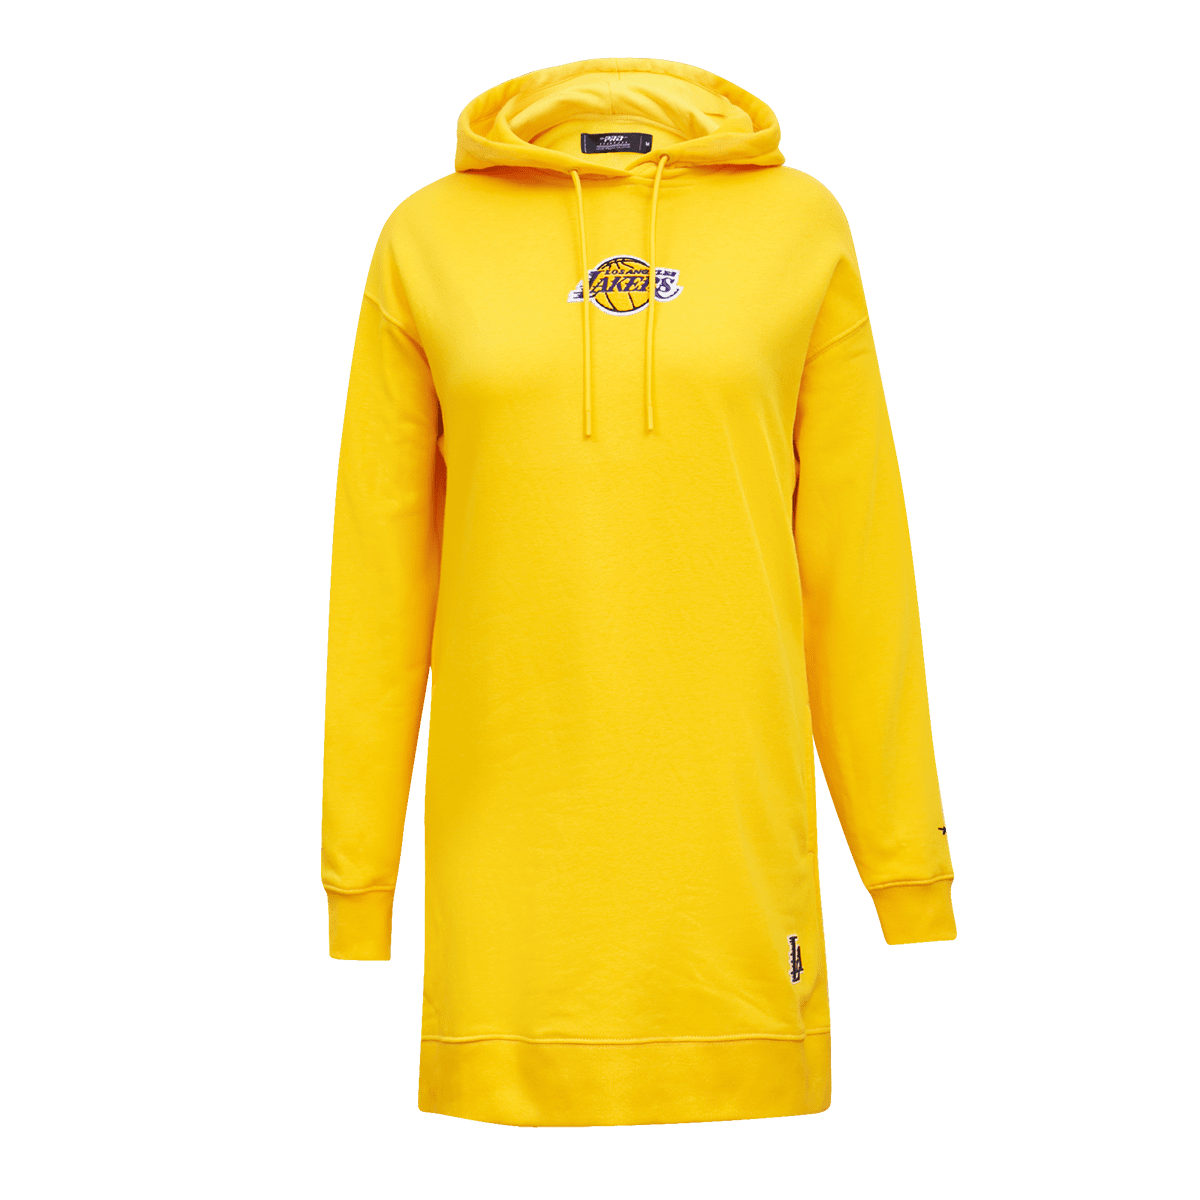 LOS ANGELES LAKERS CLASSIC FLC HOODIE DRESS (YELLOW)